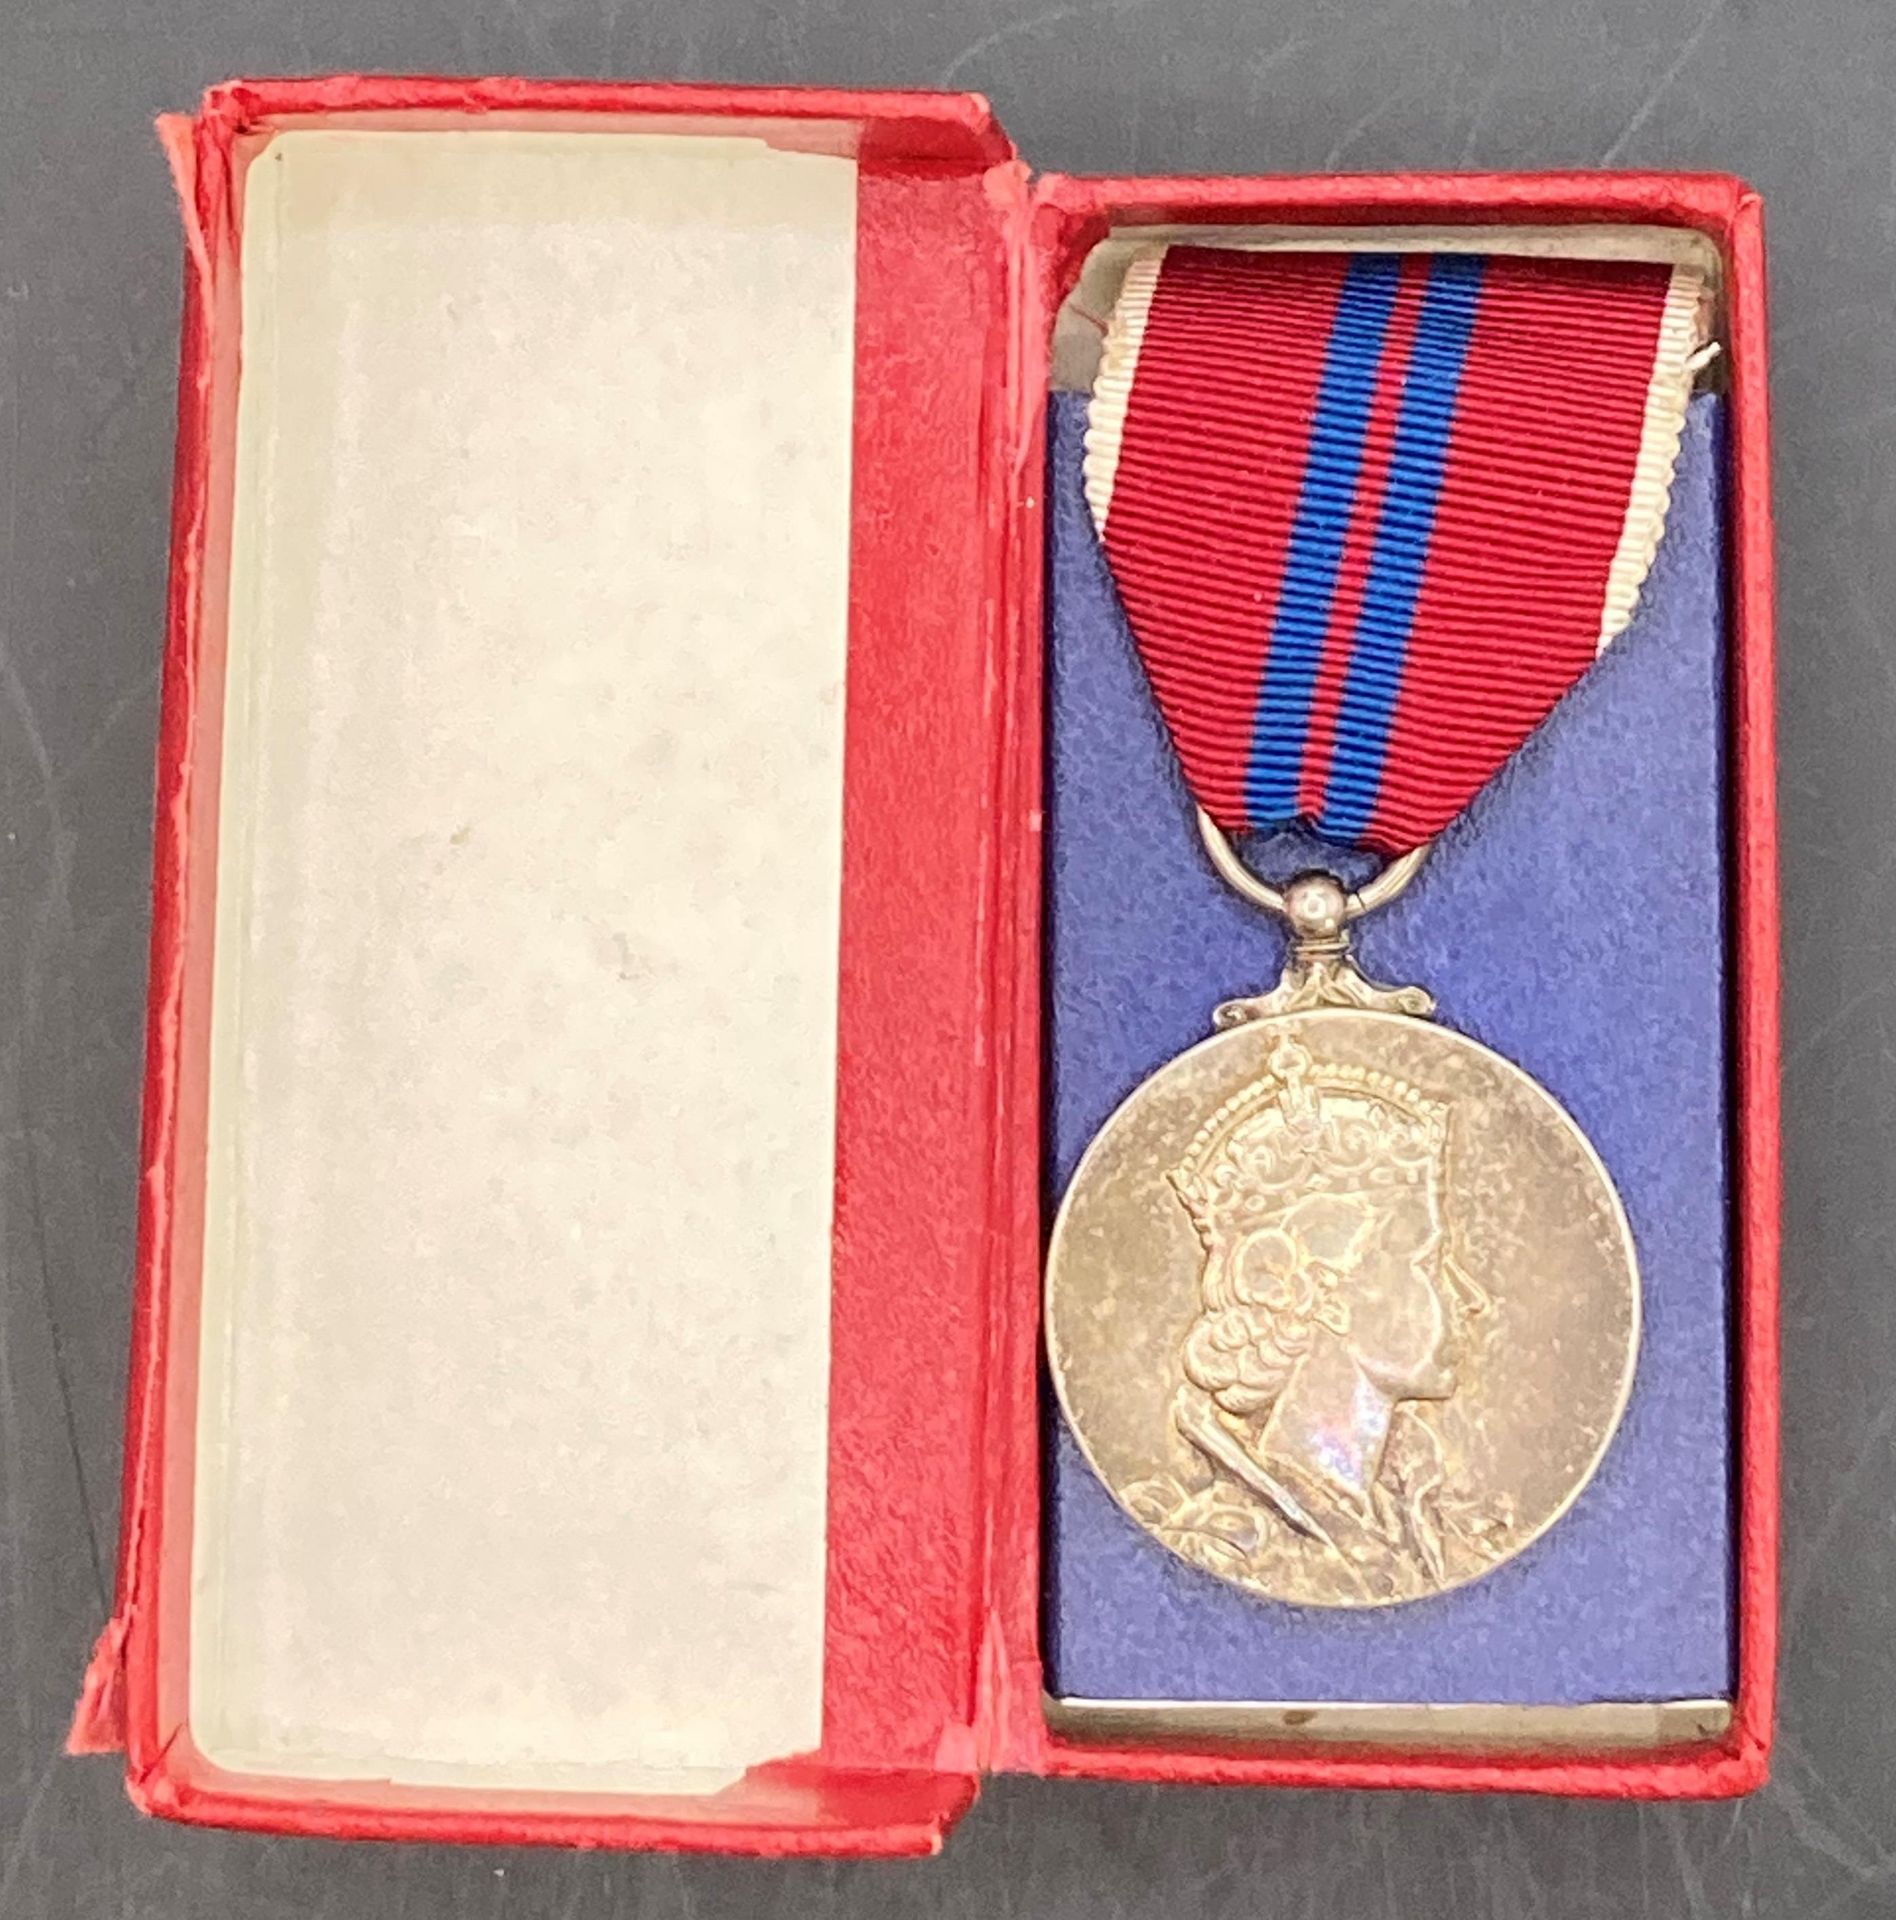 Coronation 1952 medal with ribbon in box of issue (Saleroom location: S3 GC5)